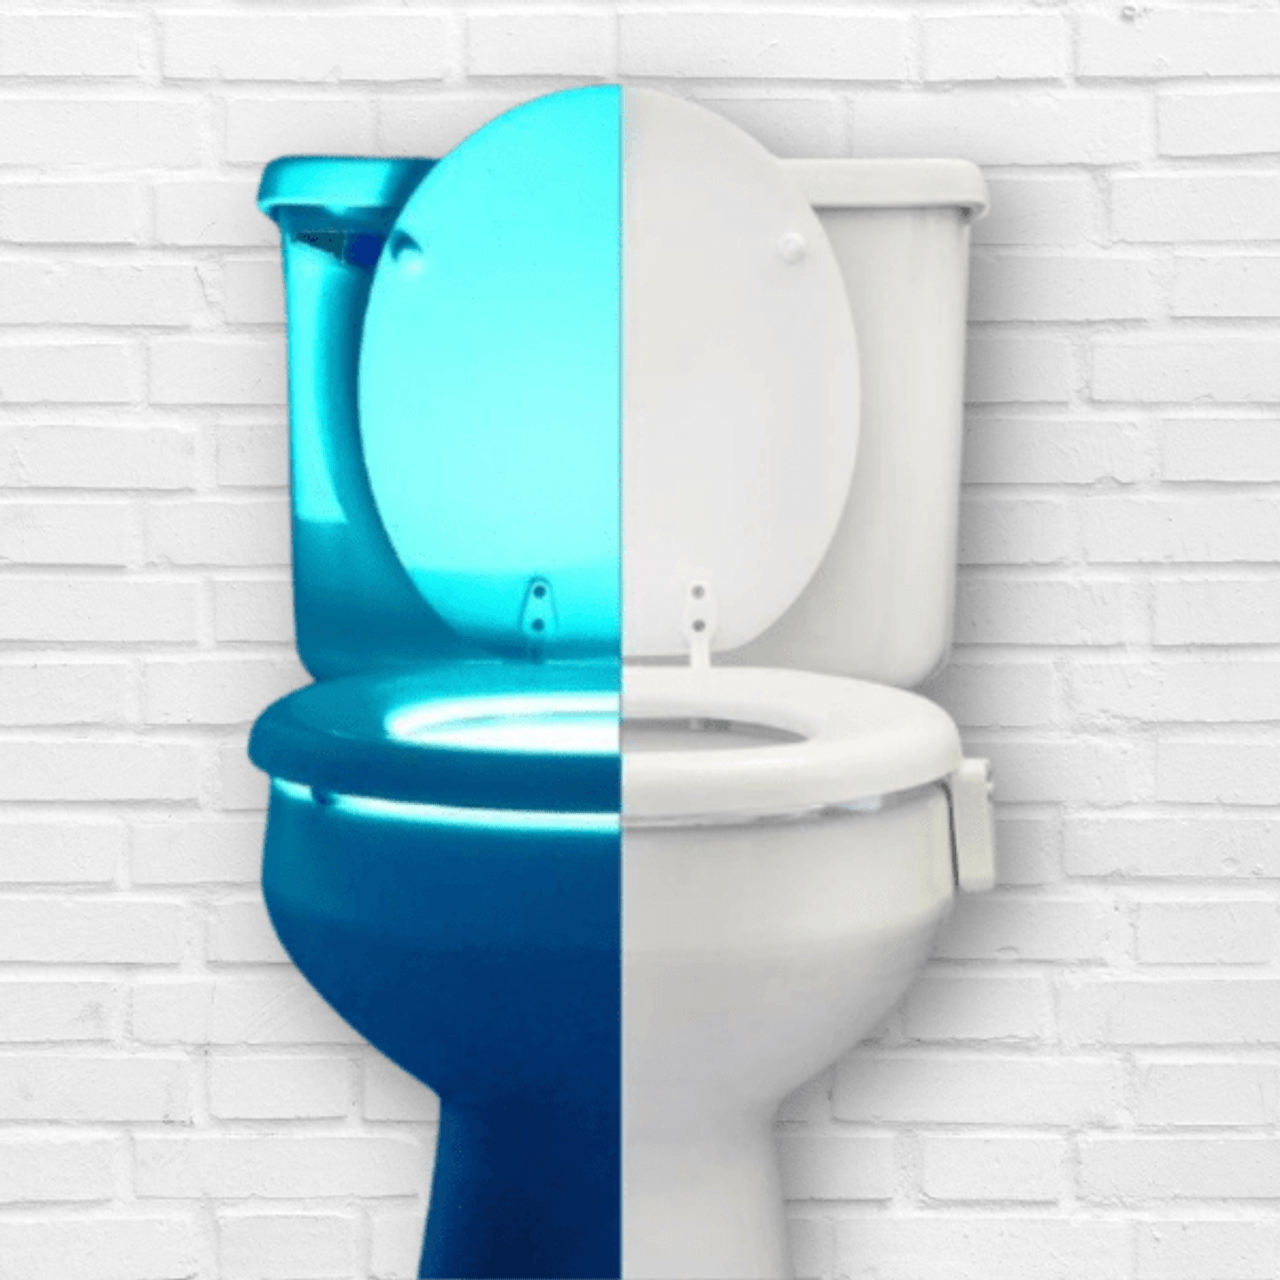 https://cdn11.bigcommerce.com/s-yvpirc28f4/images/stencil/1280x1280/products/44740/85707/ecobright-toilet-night-light-snatcher-online-shopping-south-africa-28101617057951__69161.1629261131.png?c=1&imbypass=on